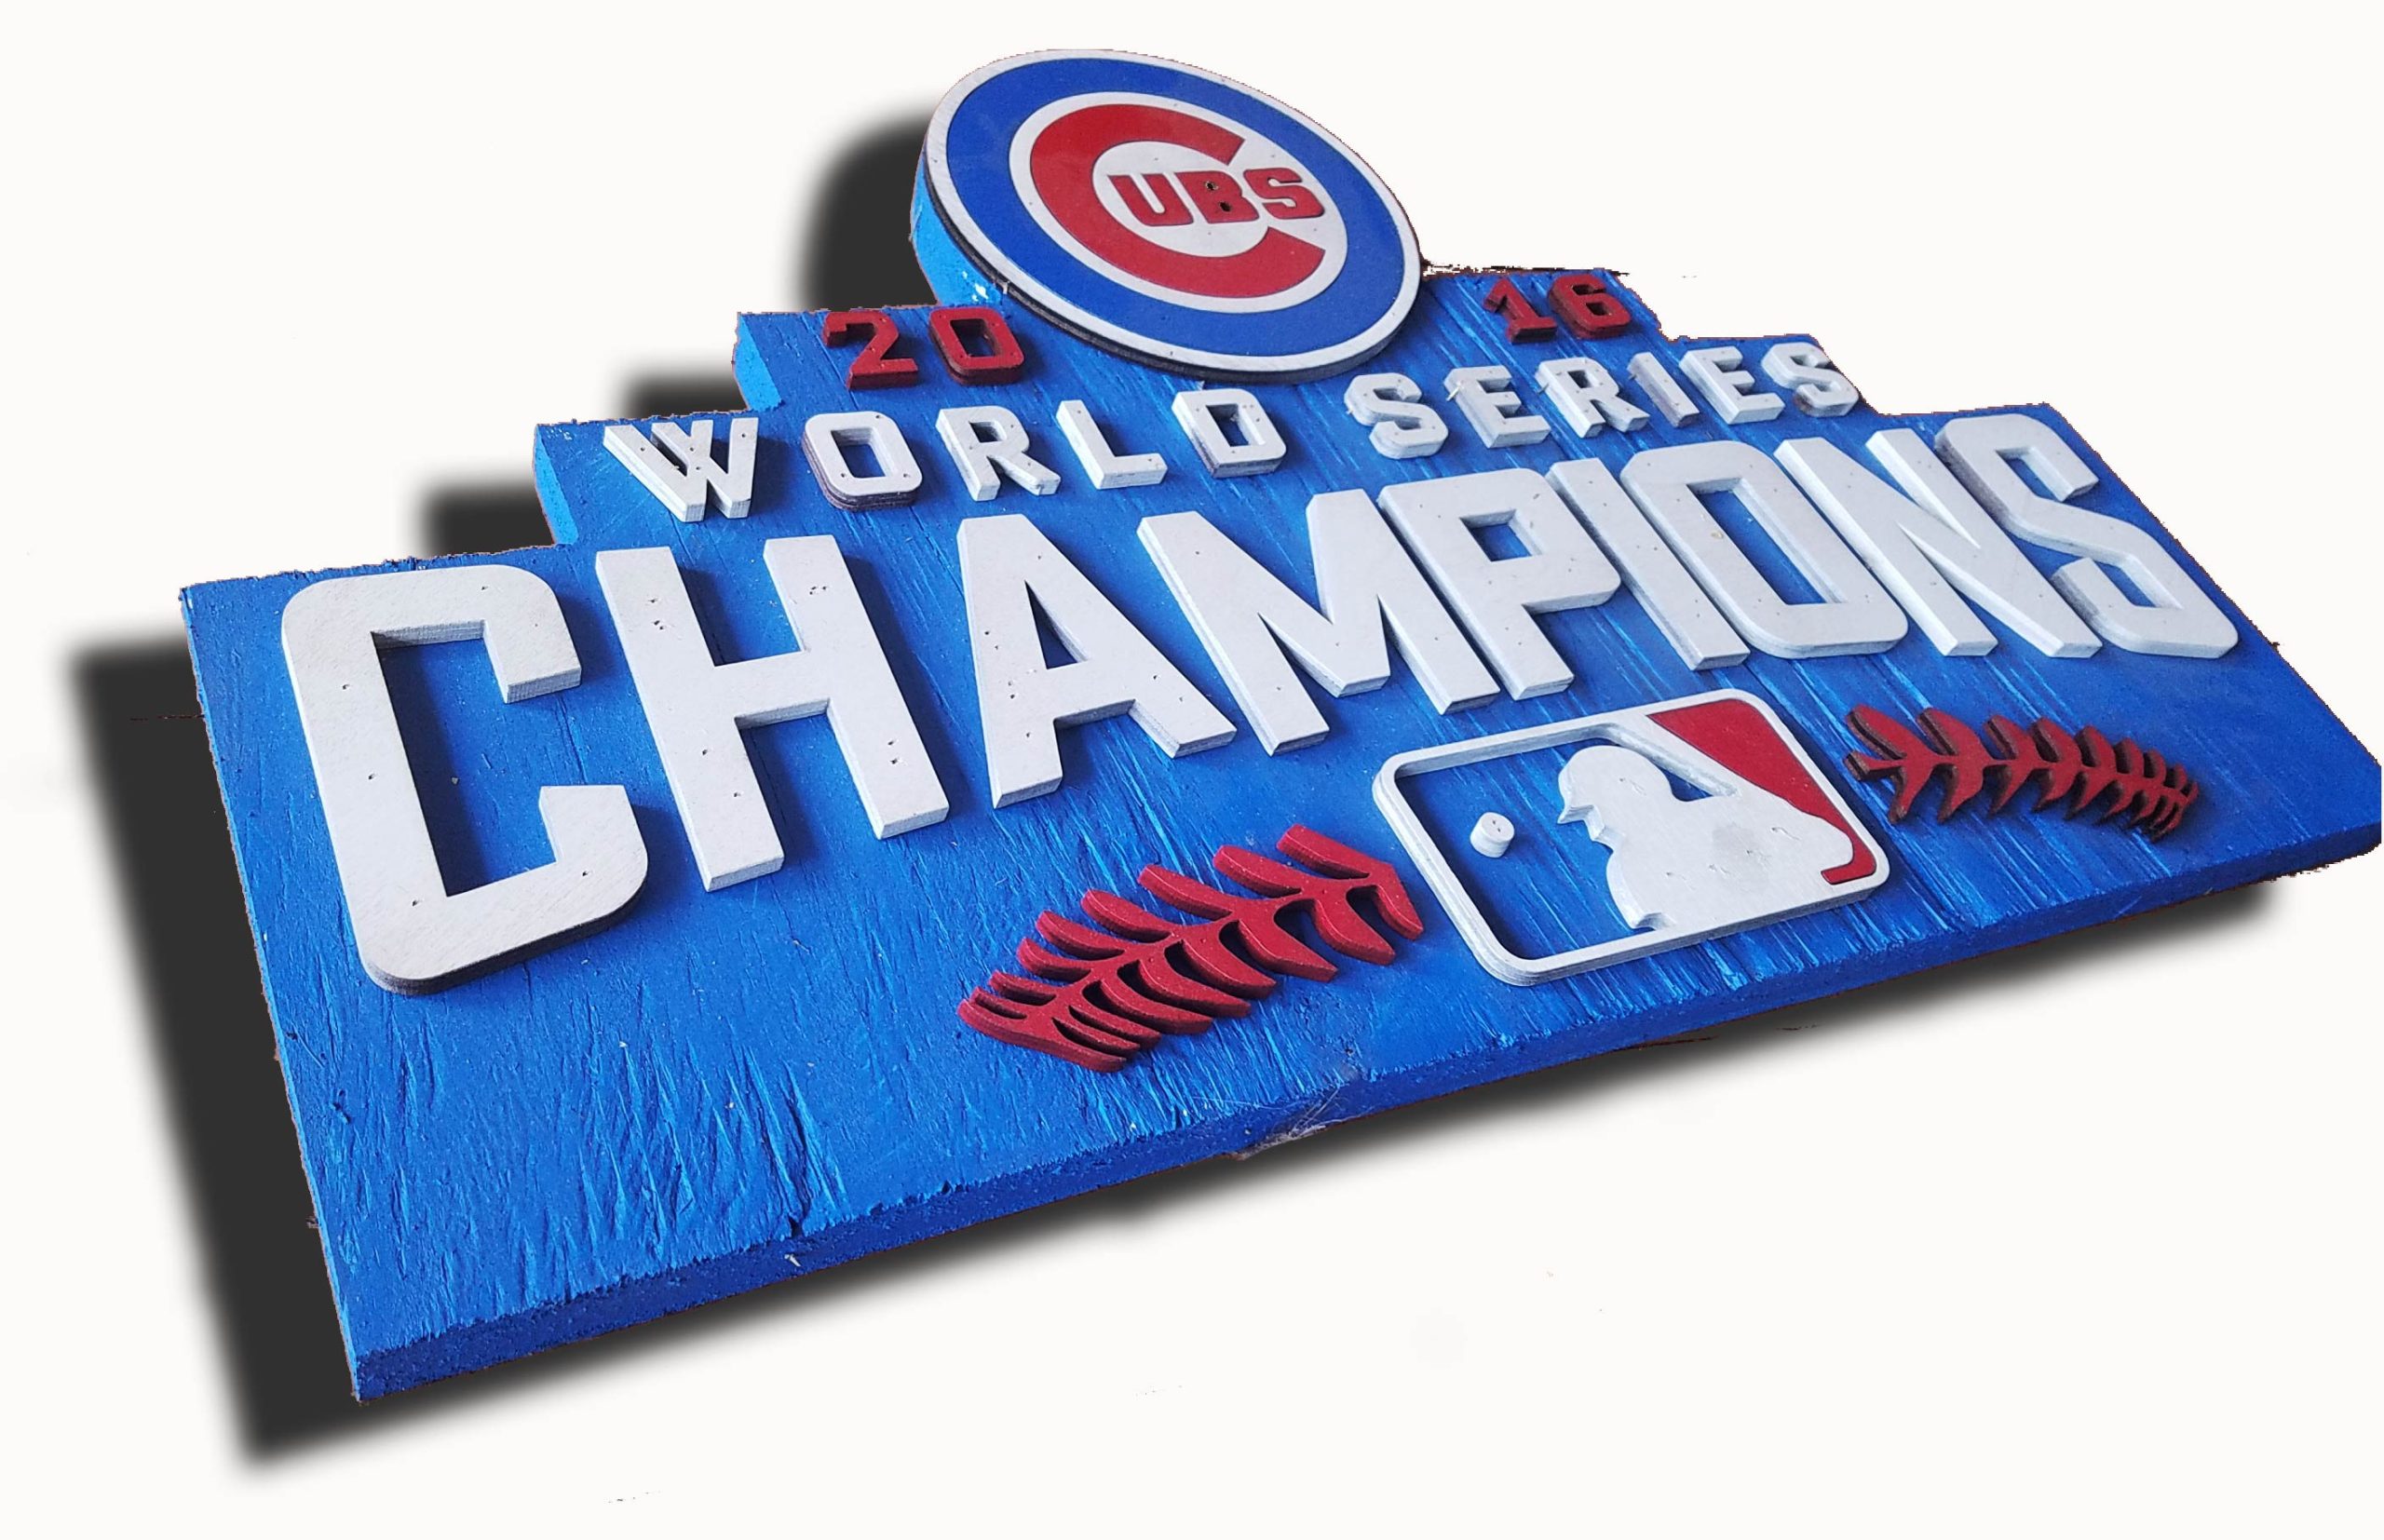 World Series Champions Chicago Cubs Handmade distressed wood sign, vintage, art, weathered, recycled, Baseball, home decor, Man Cave, Blue